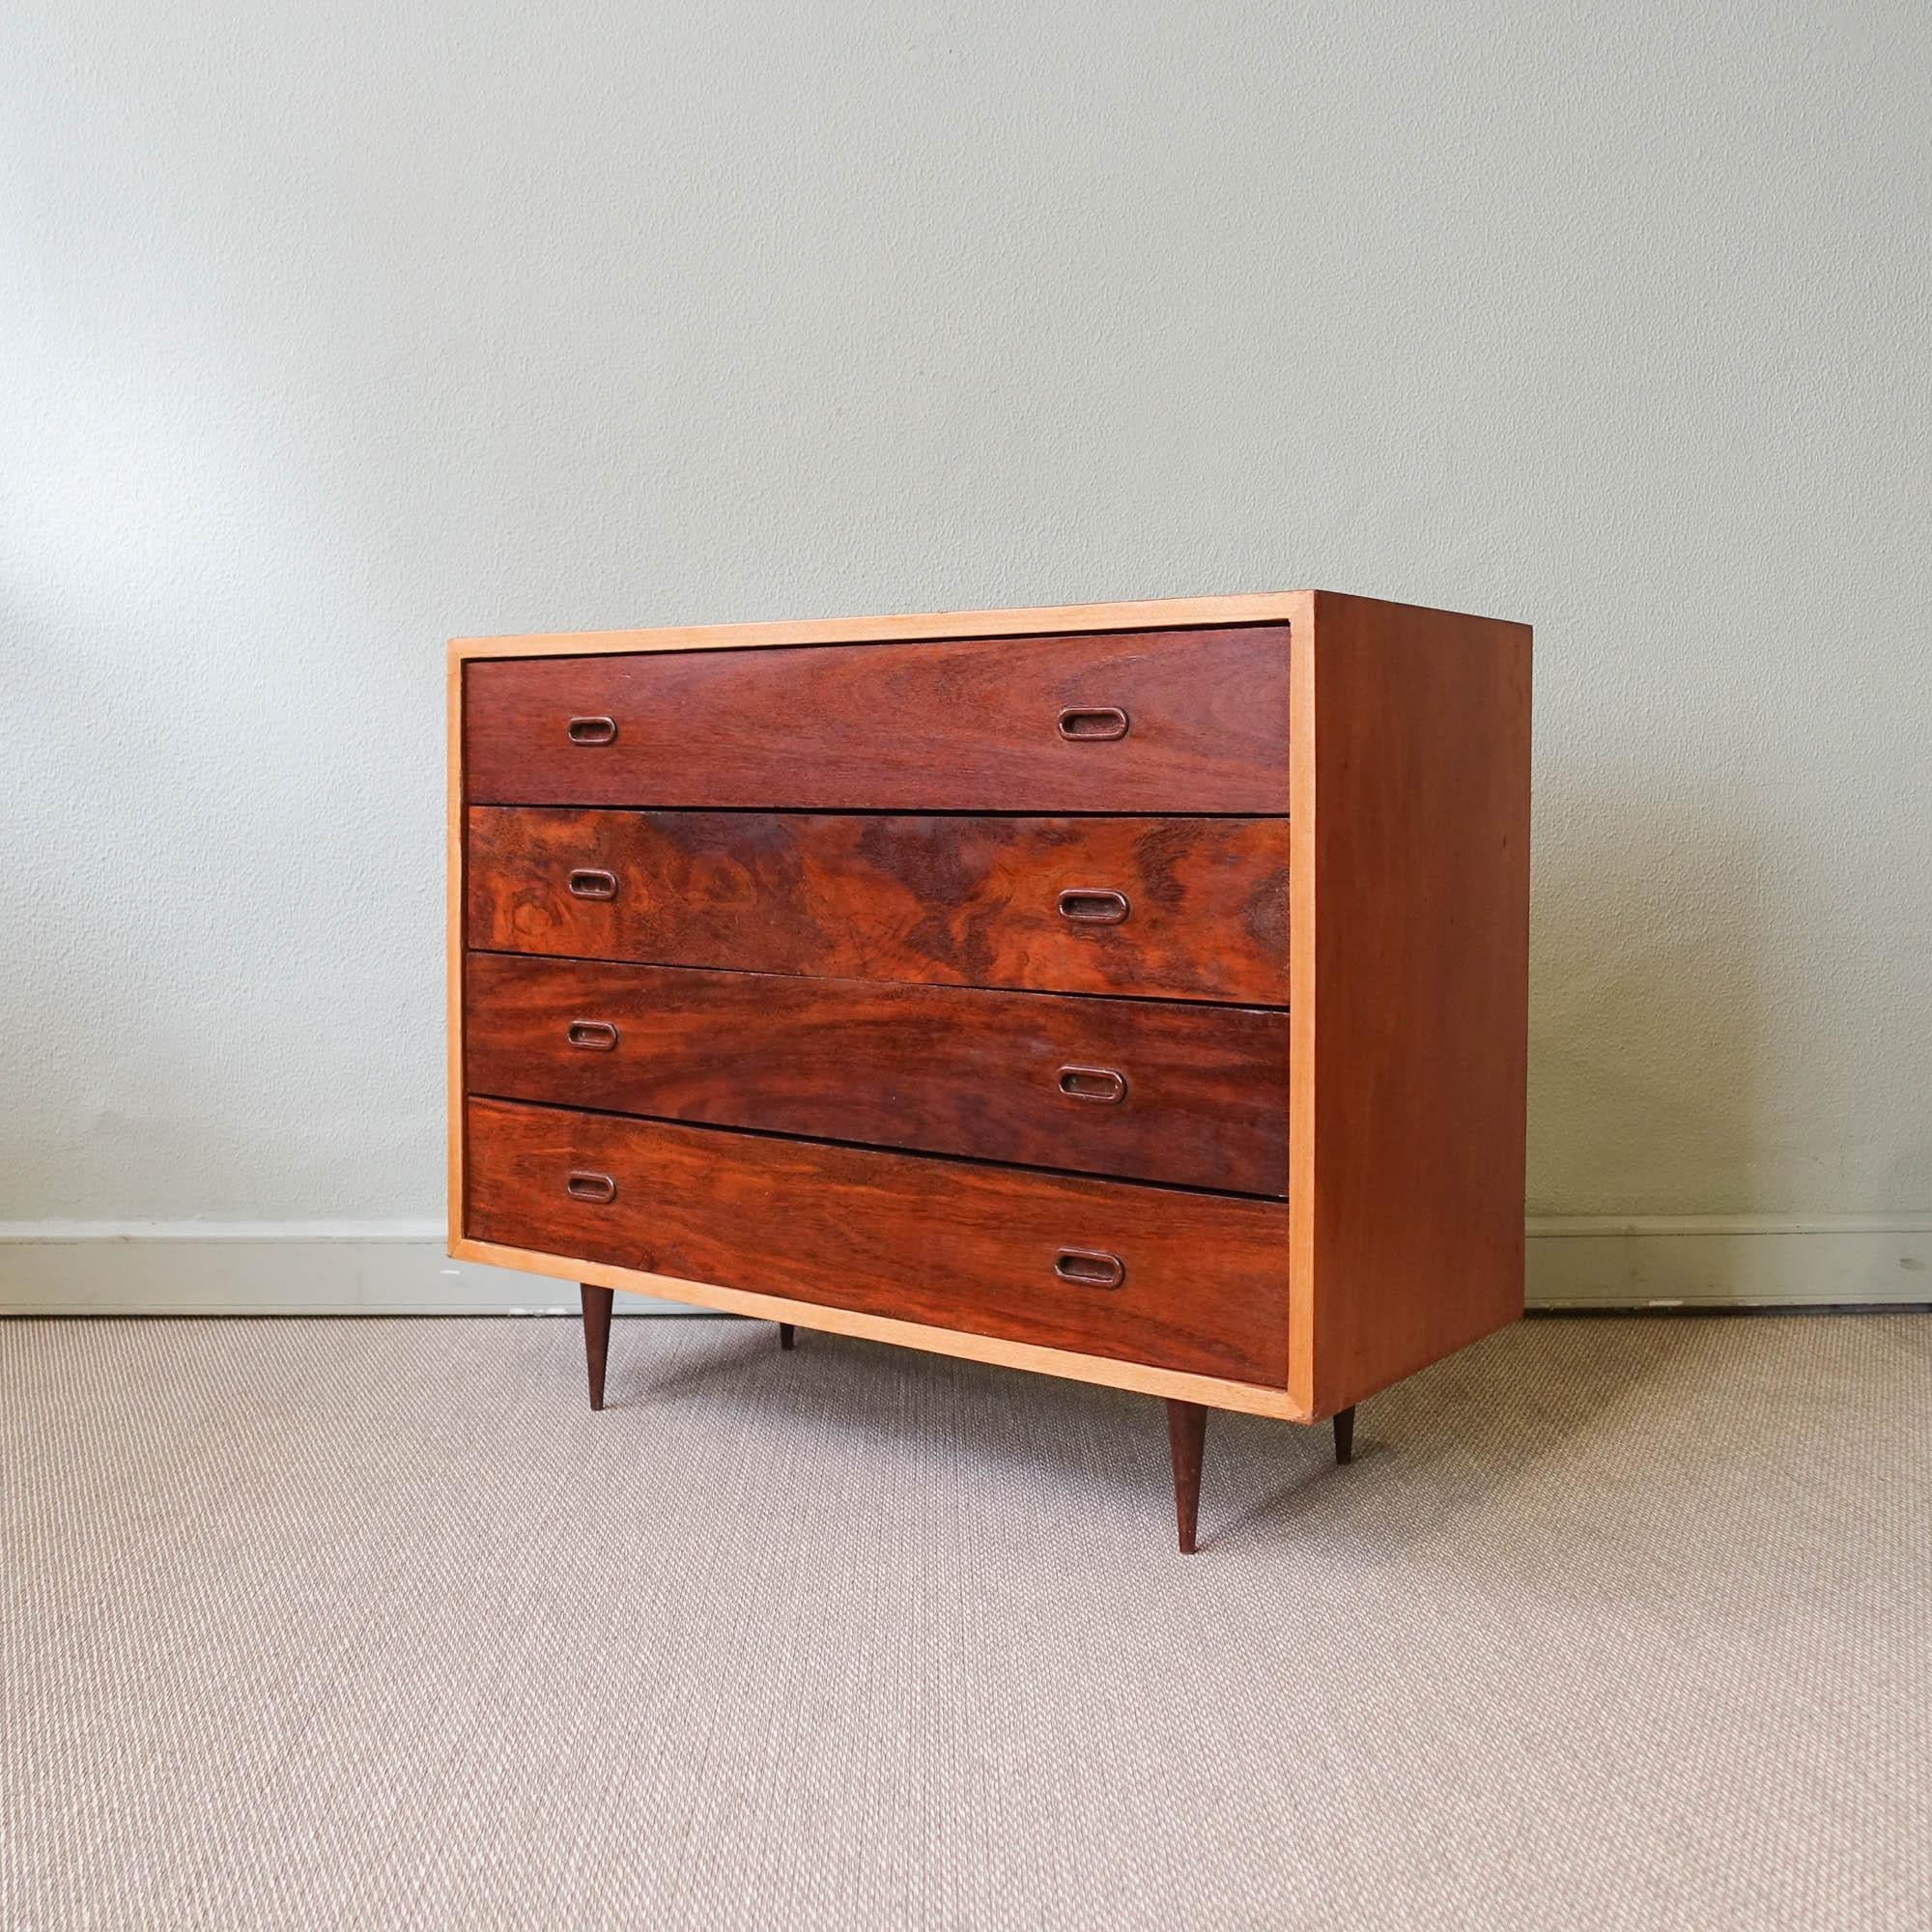 This chest of drawers was designed and produced in Portugal, during the 1950's. It is made of sucupira and agba wood with oval wooden handles. It features four big drawers in total. In original condition, with a deep wood cleaning.